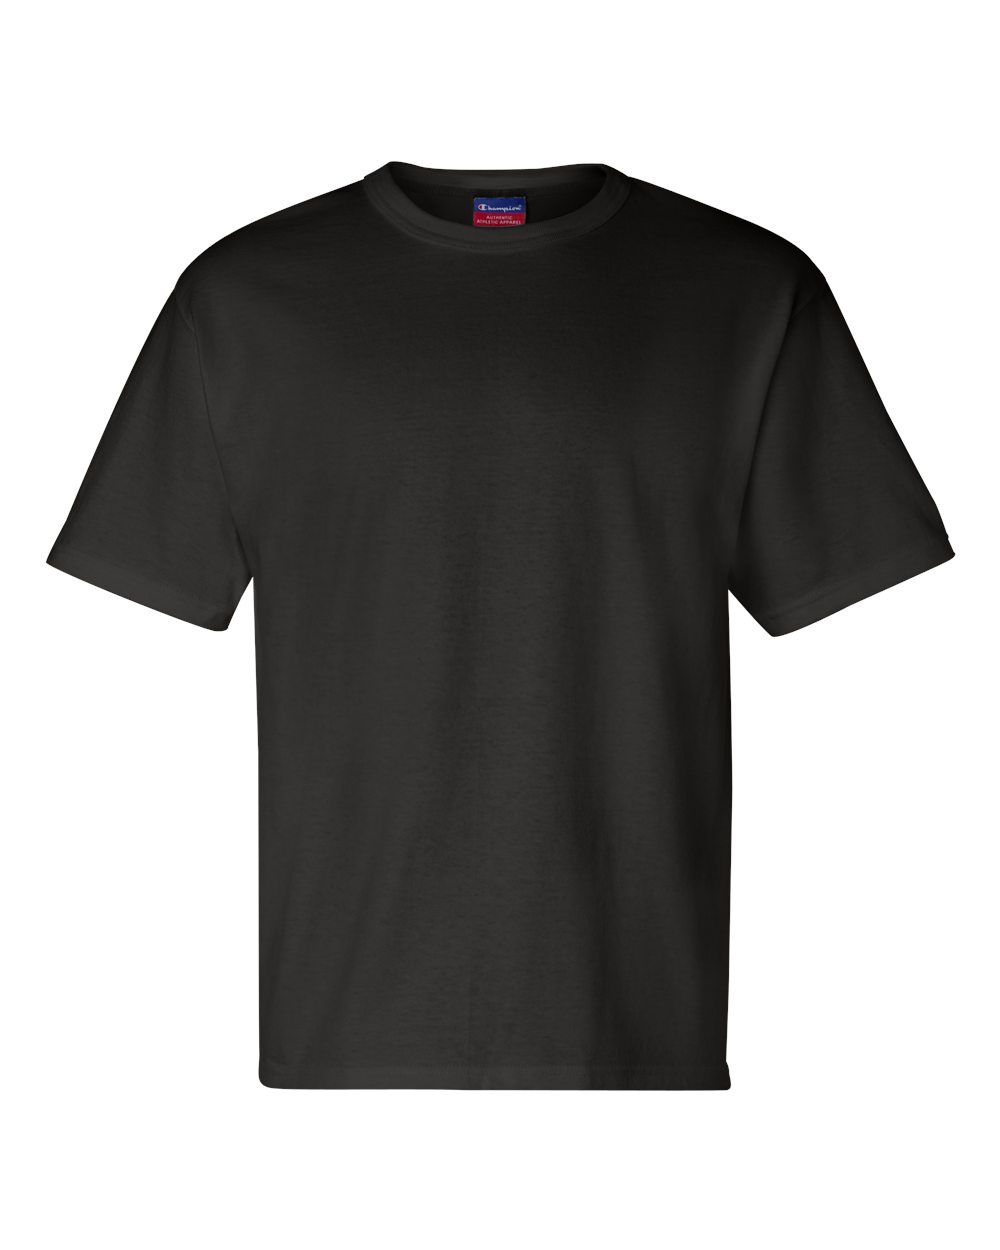 fully customizable champion heritage jersey tee shirt for your brand in multiple colors